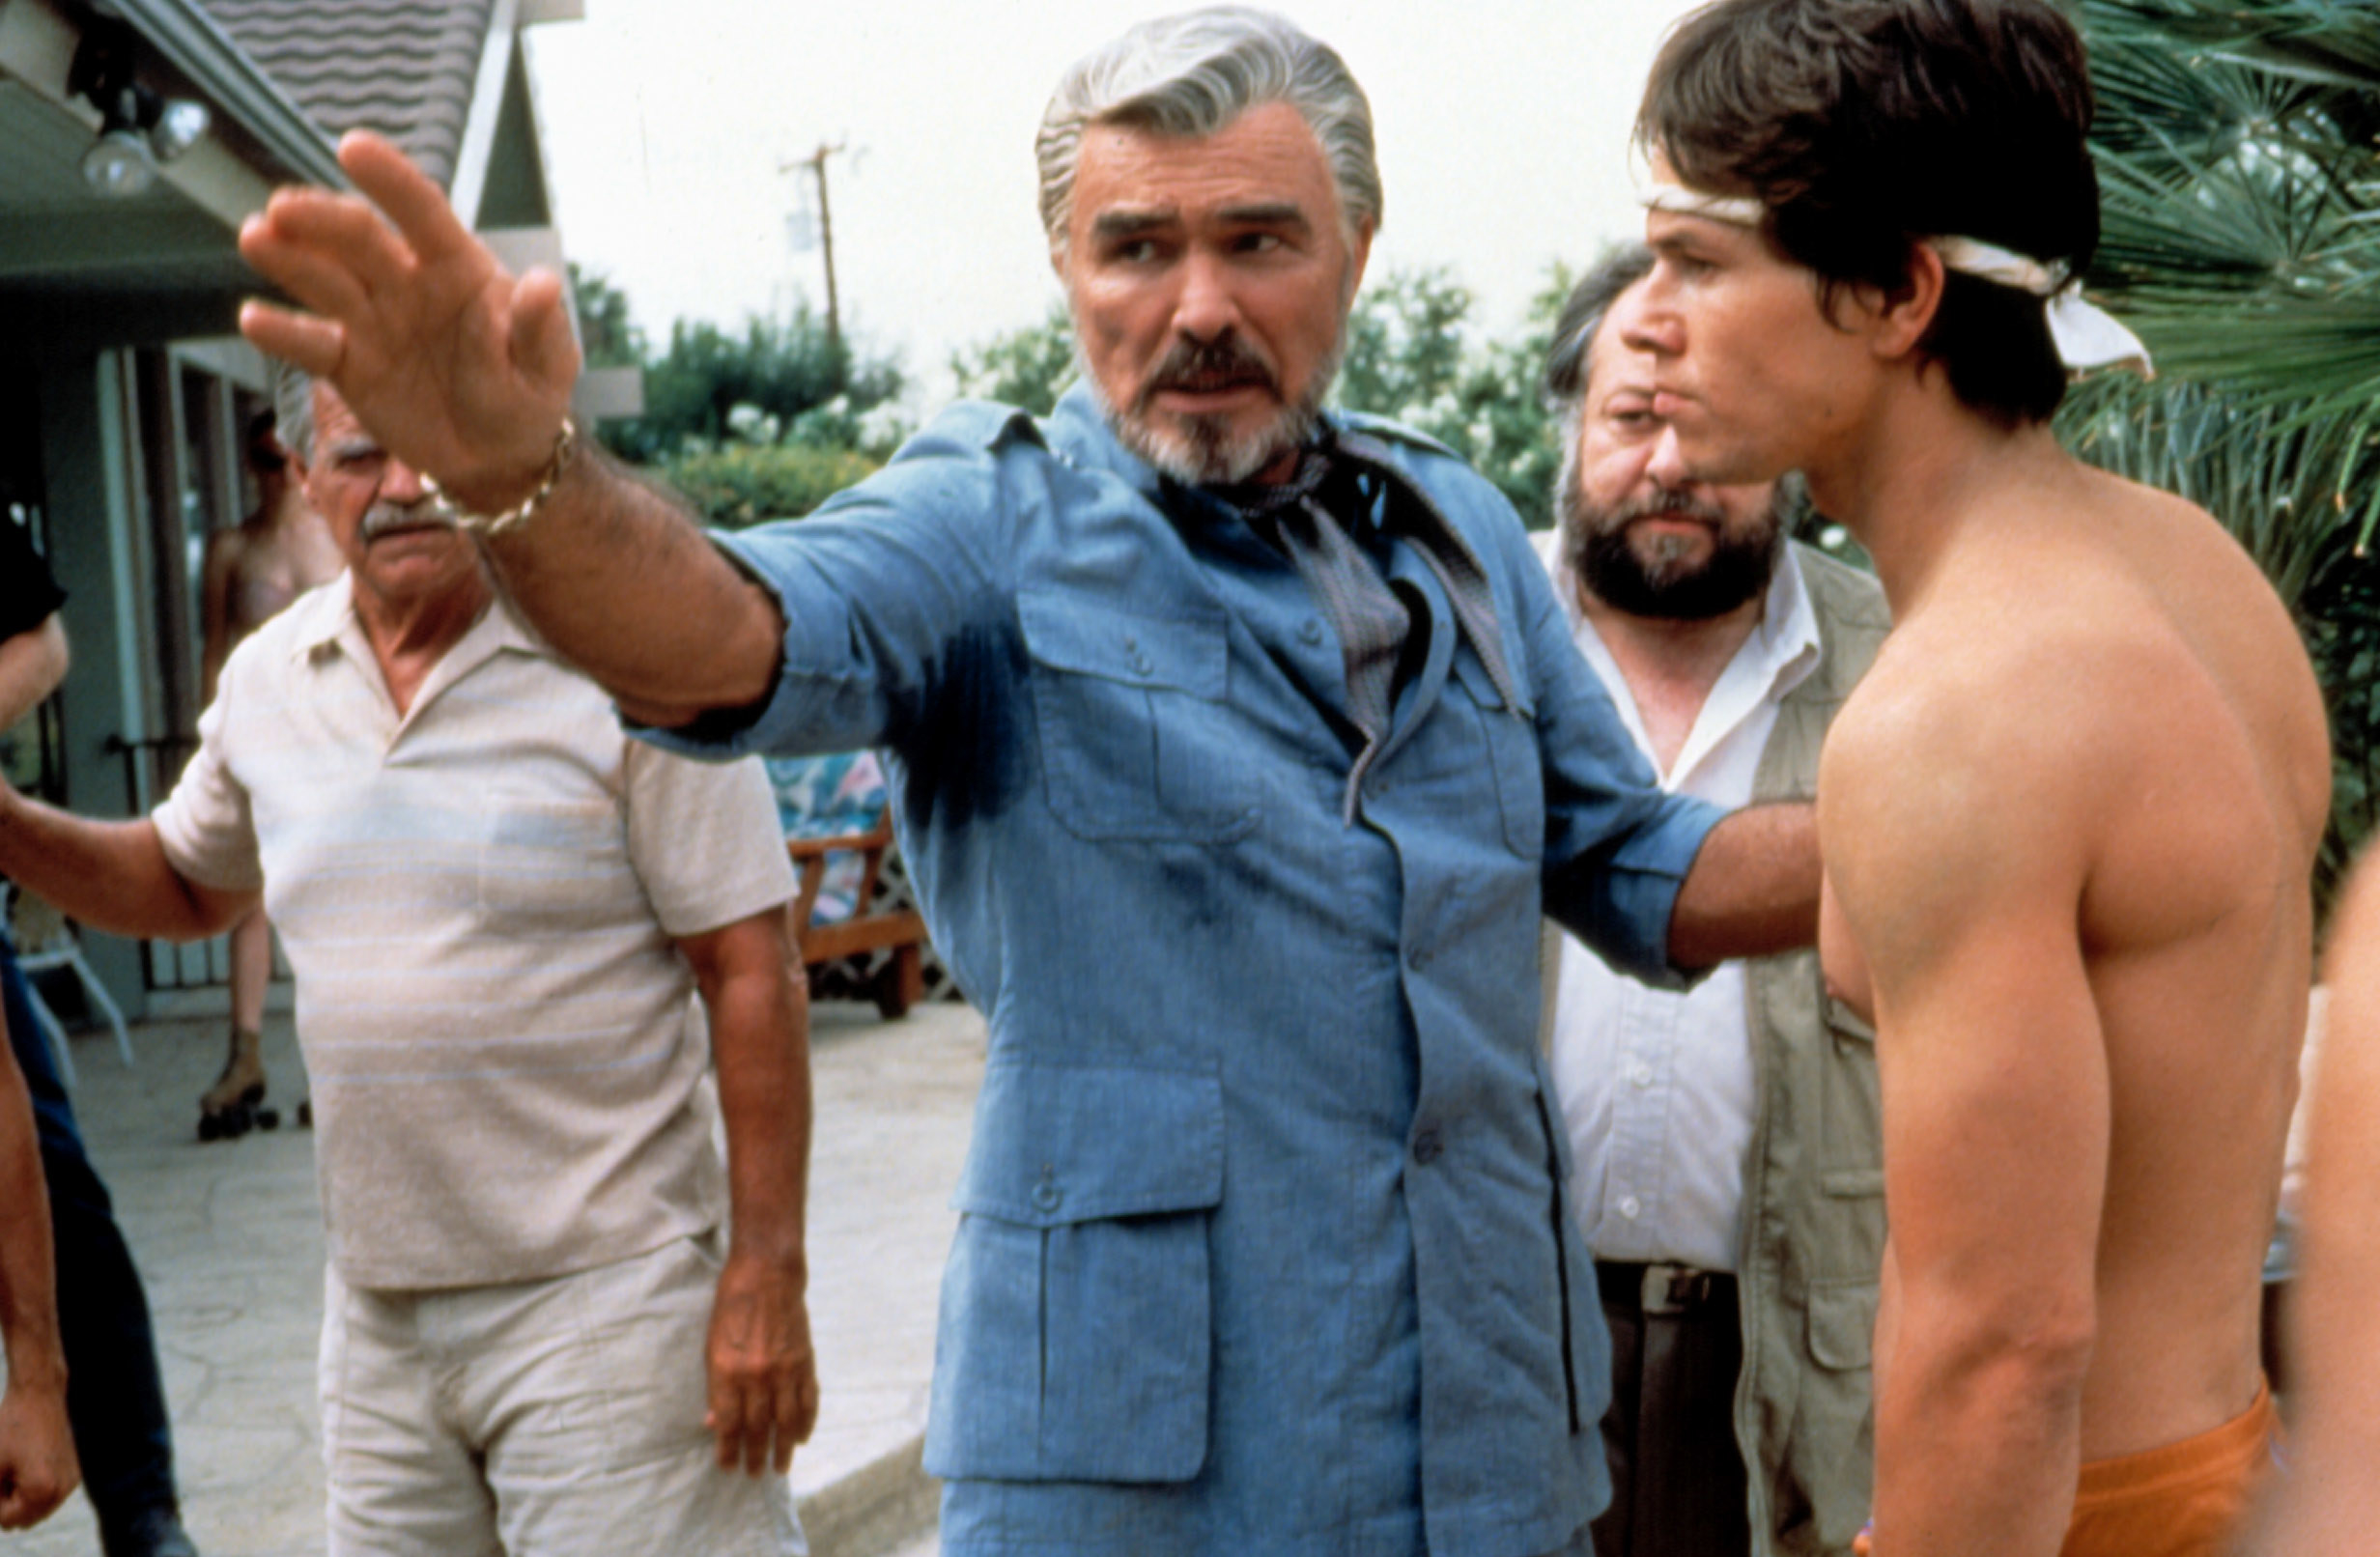 Burt Reynolds and a shirtless Mark Wahlberg in the film